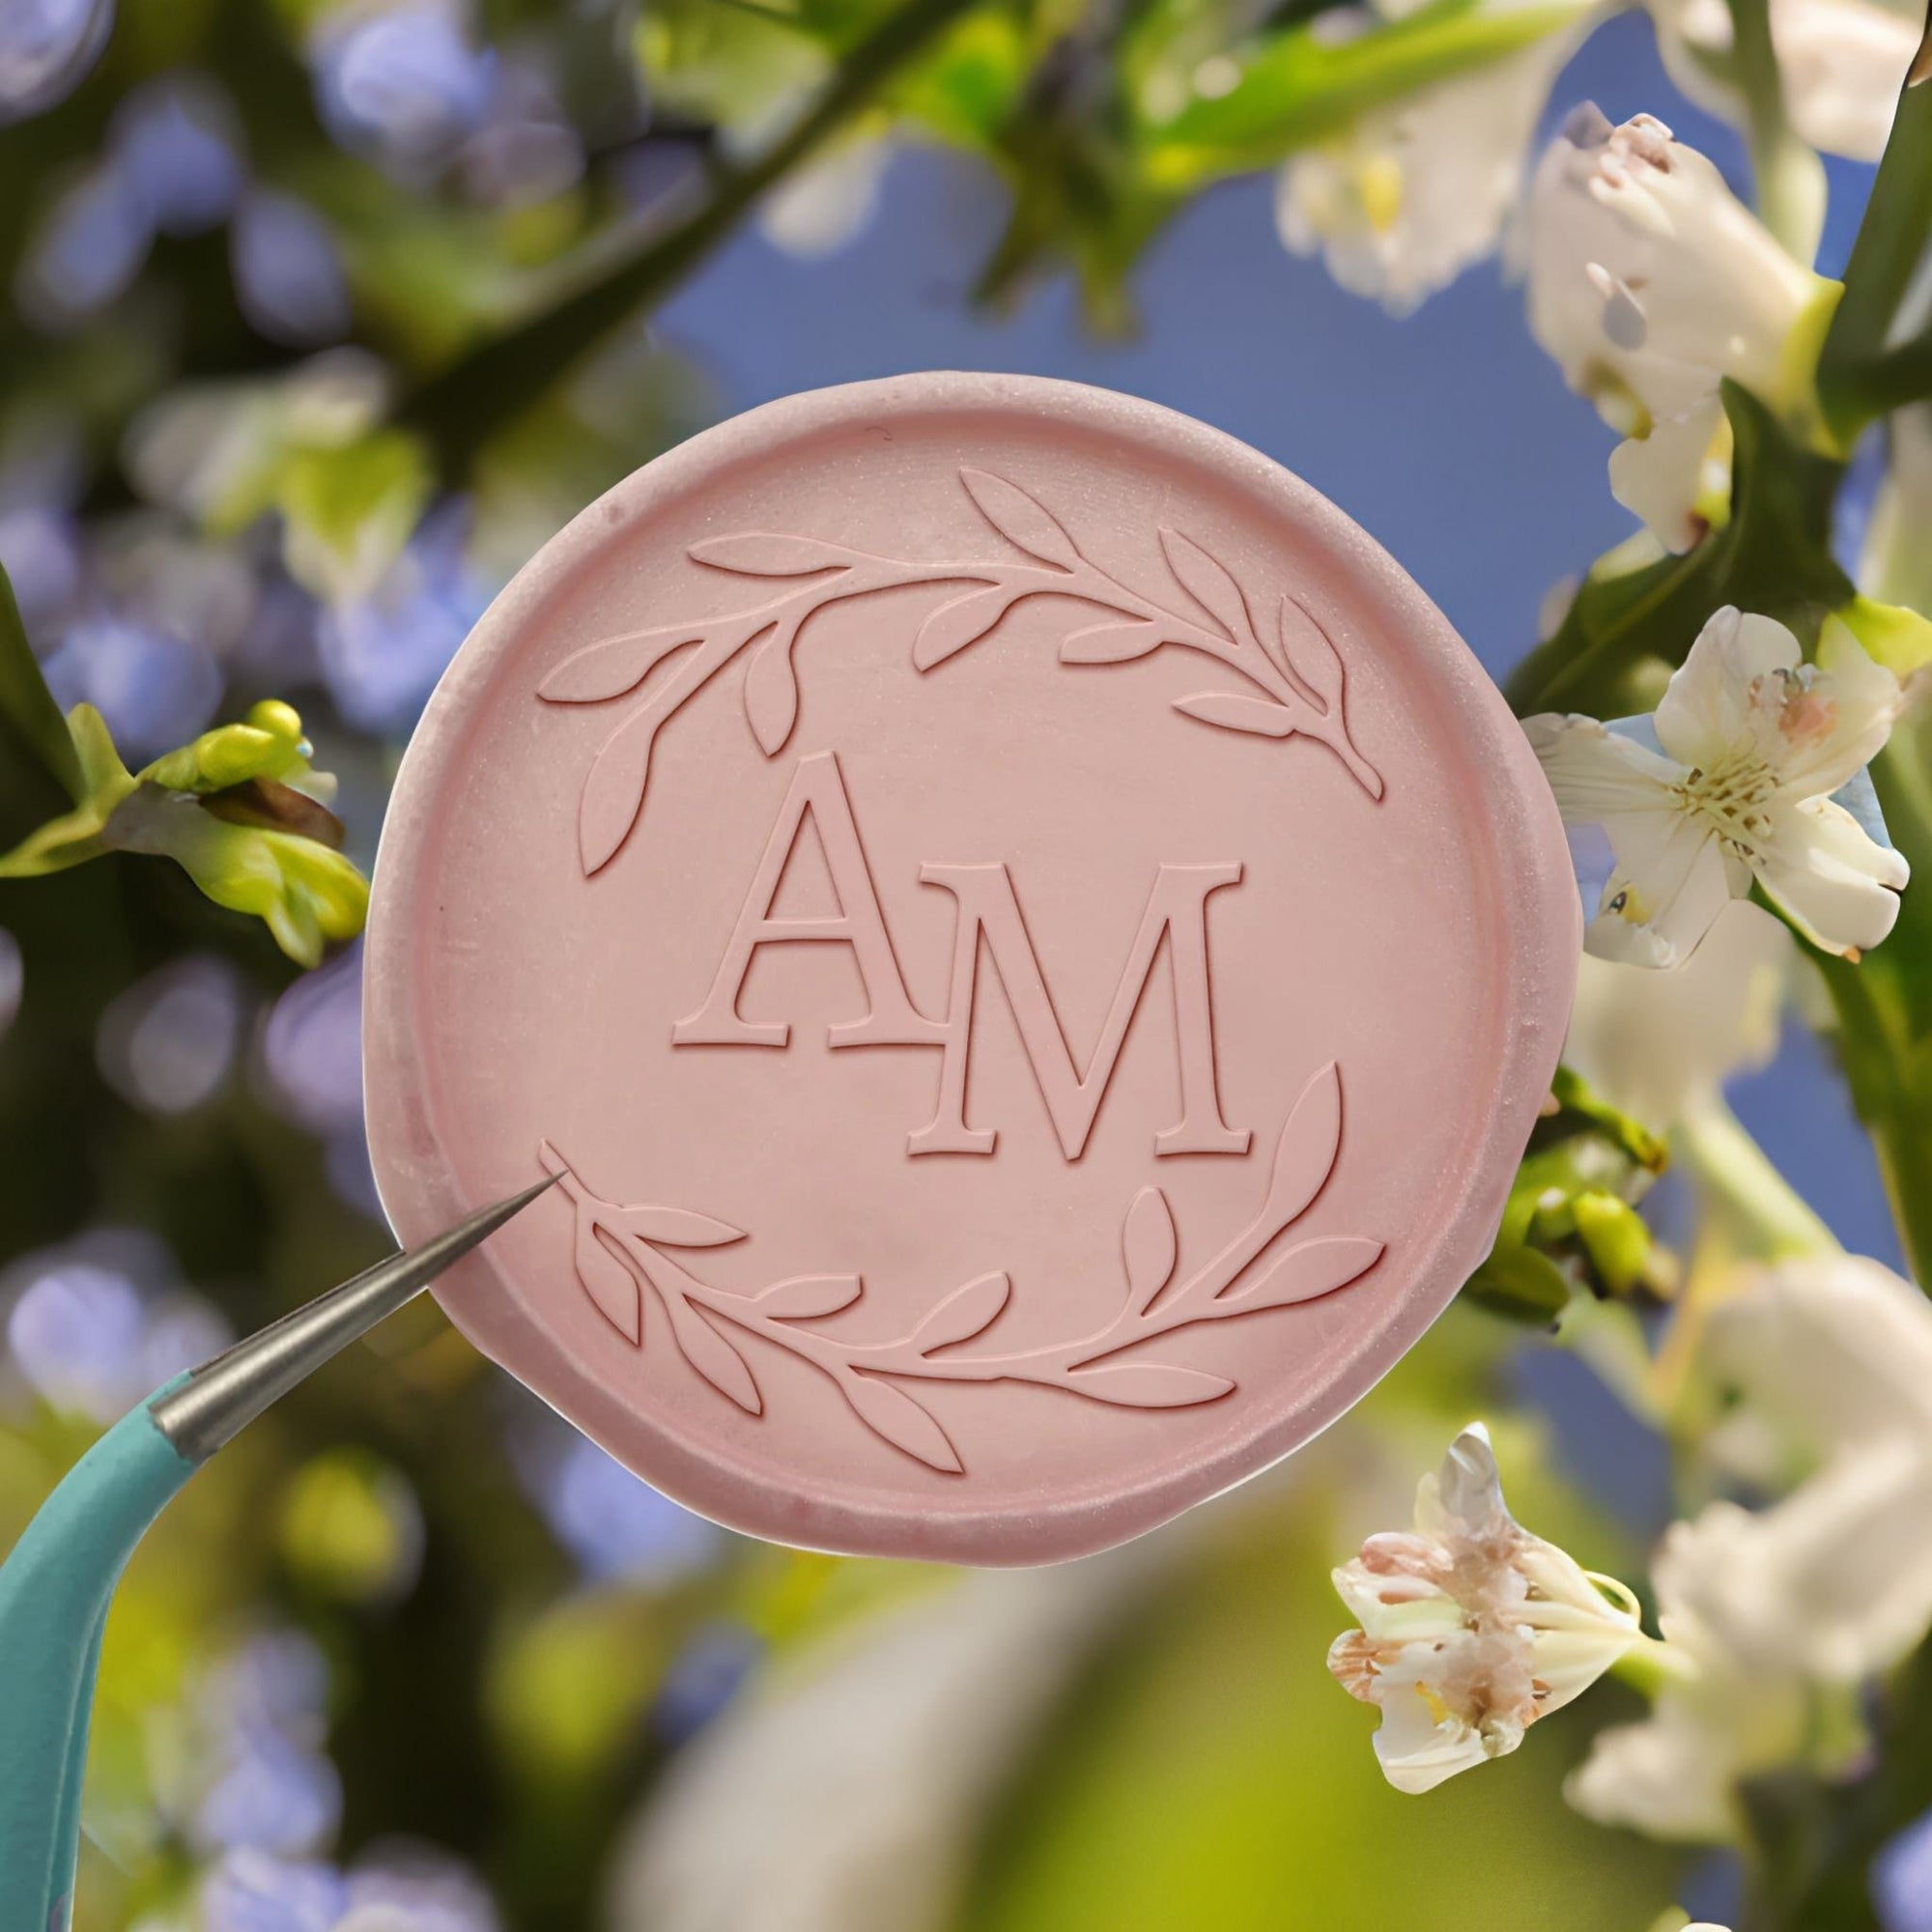 Leaf Wreath Double Initials Wedding Custom Self-Adhesive Wax Seal Stickers  - Personalized Elegance for Invitations, Favors, and More